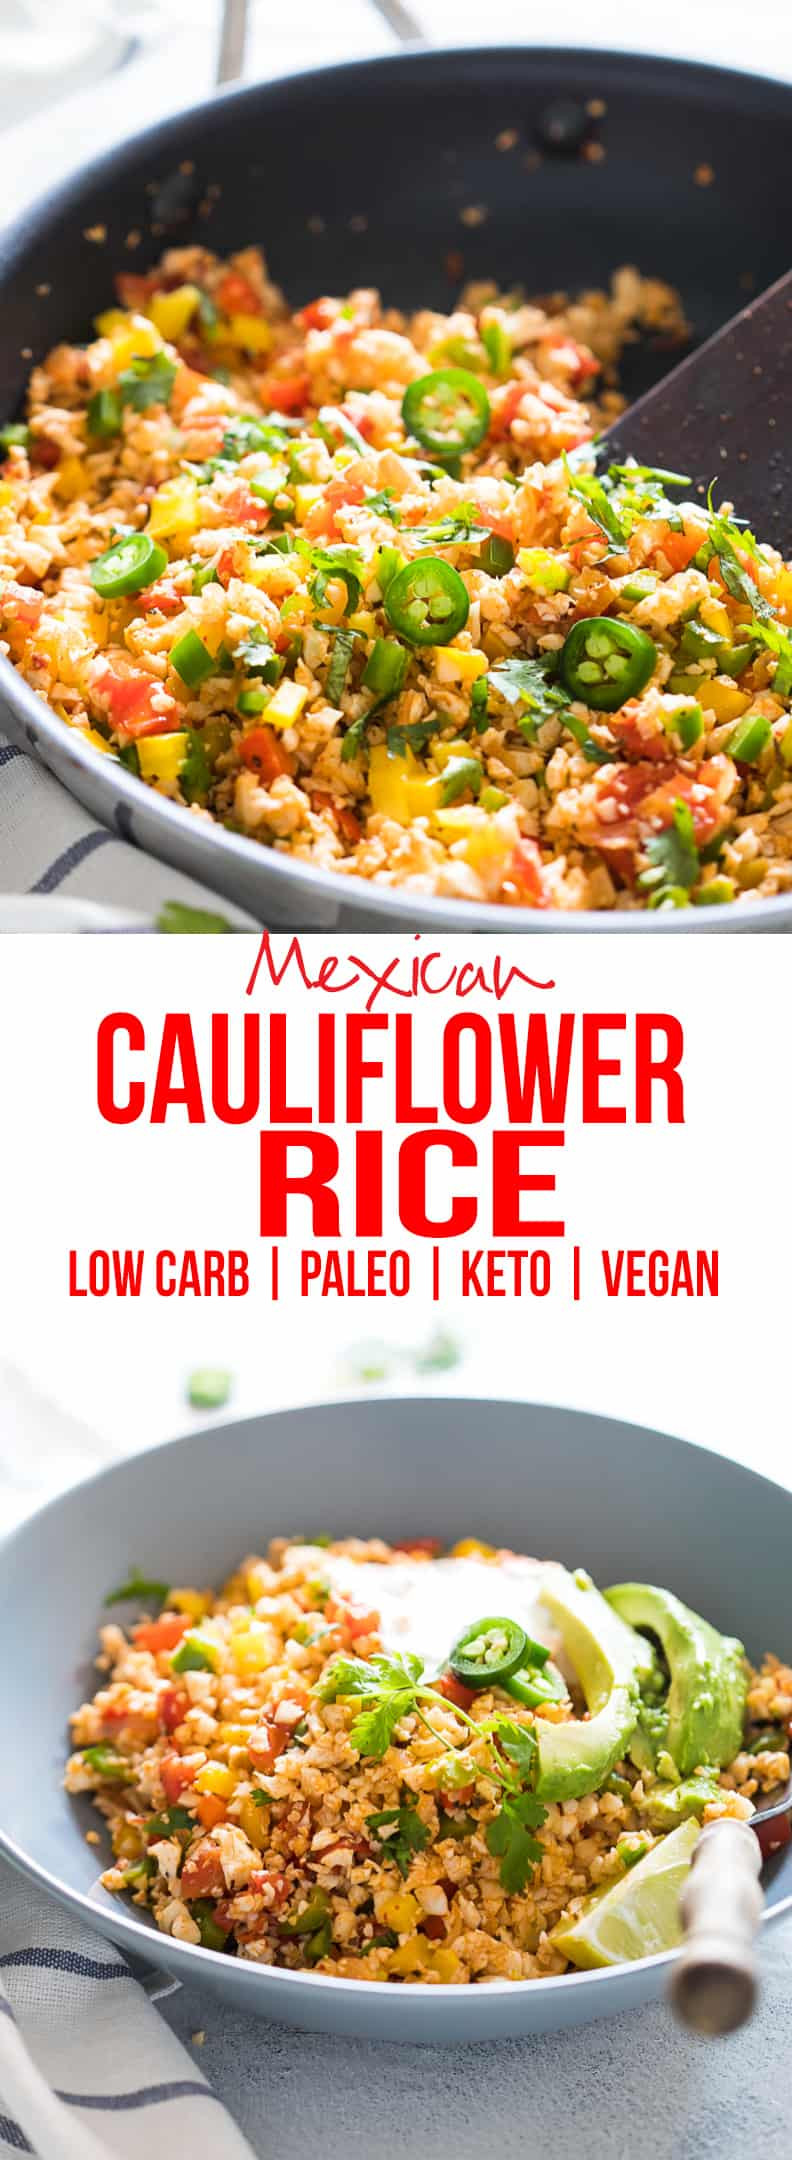 Cauliflower Rice Recipes Mexican Keto
 Low Carb Mexican Cauliflower Rice Paleo Vegan Keto